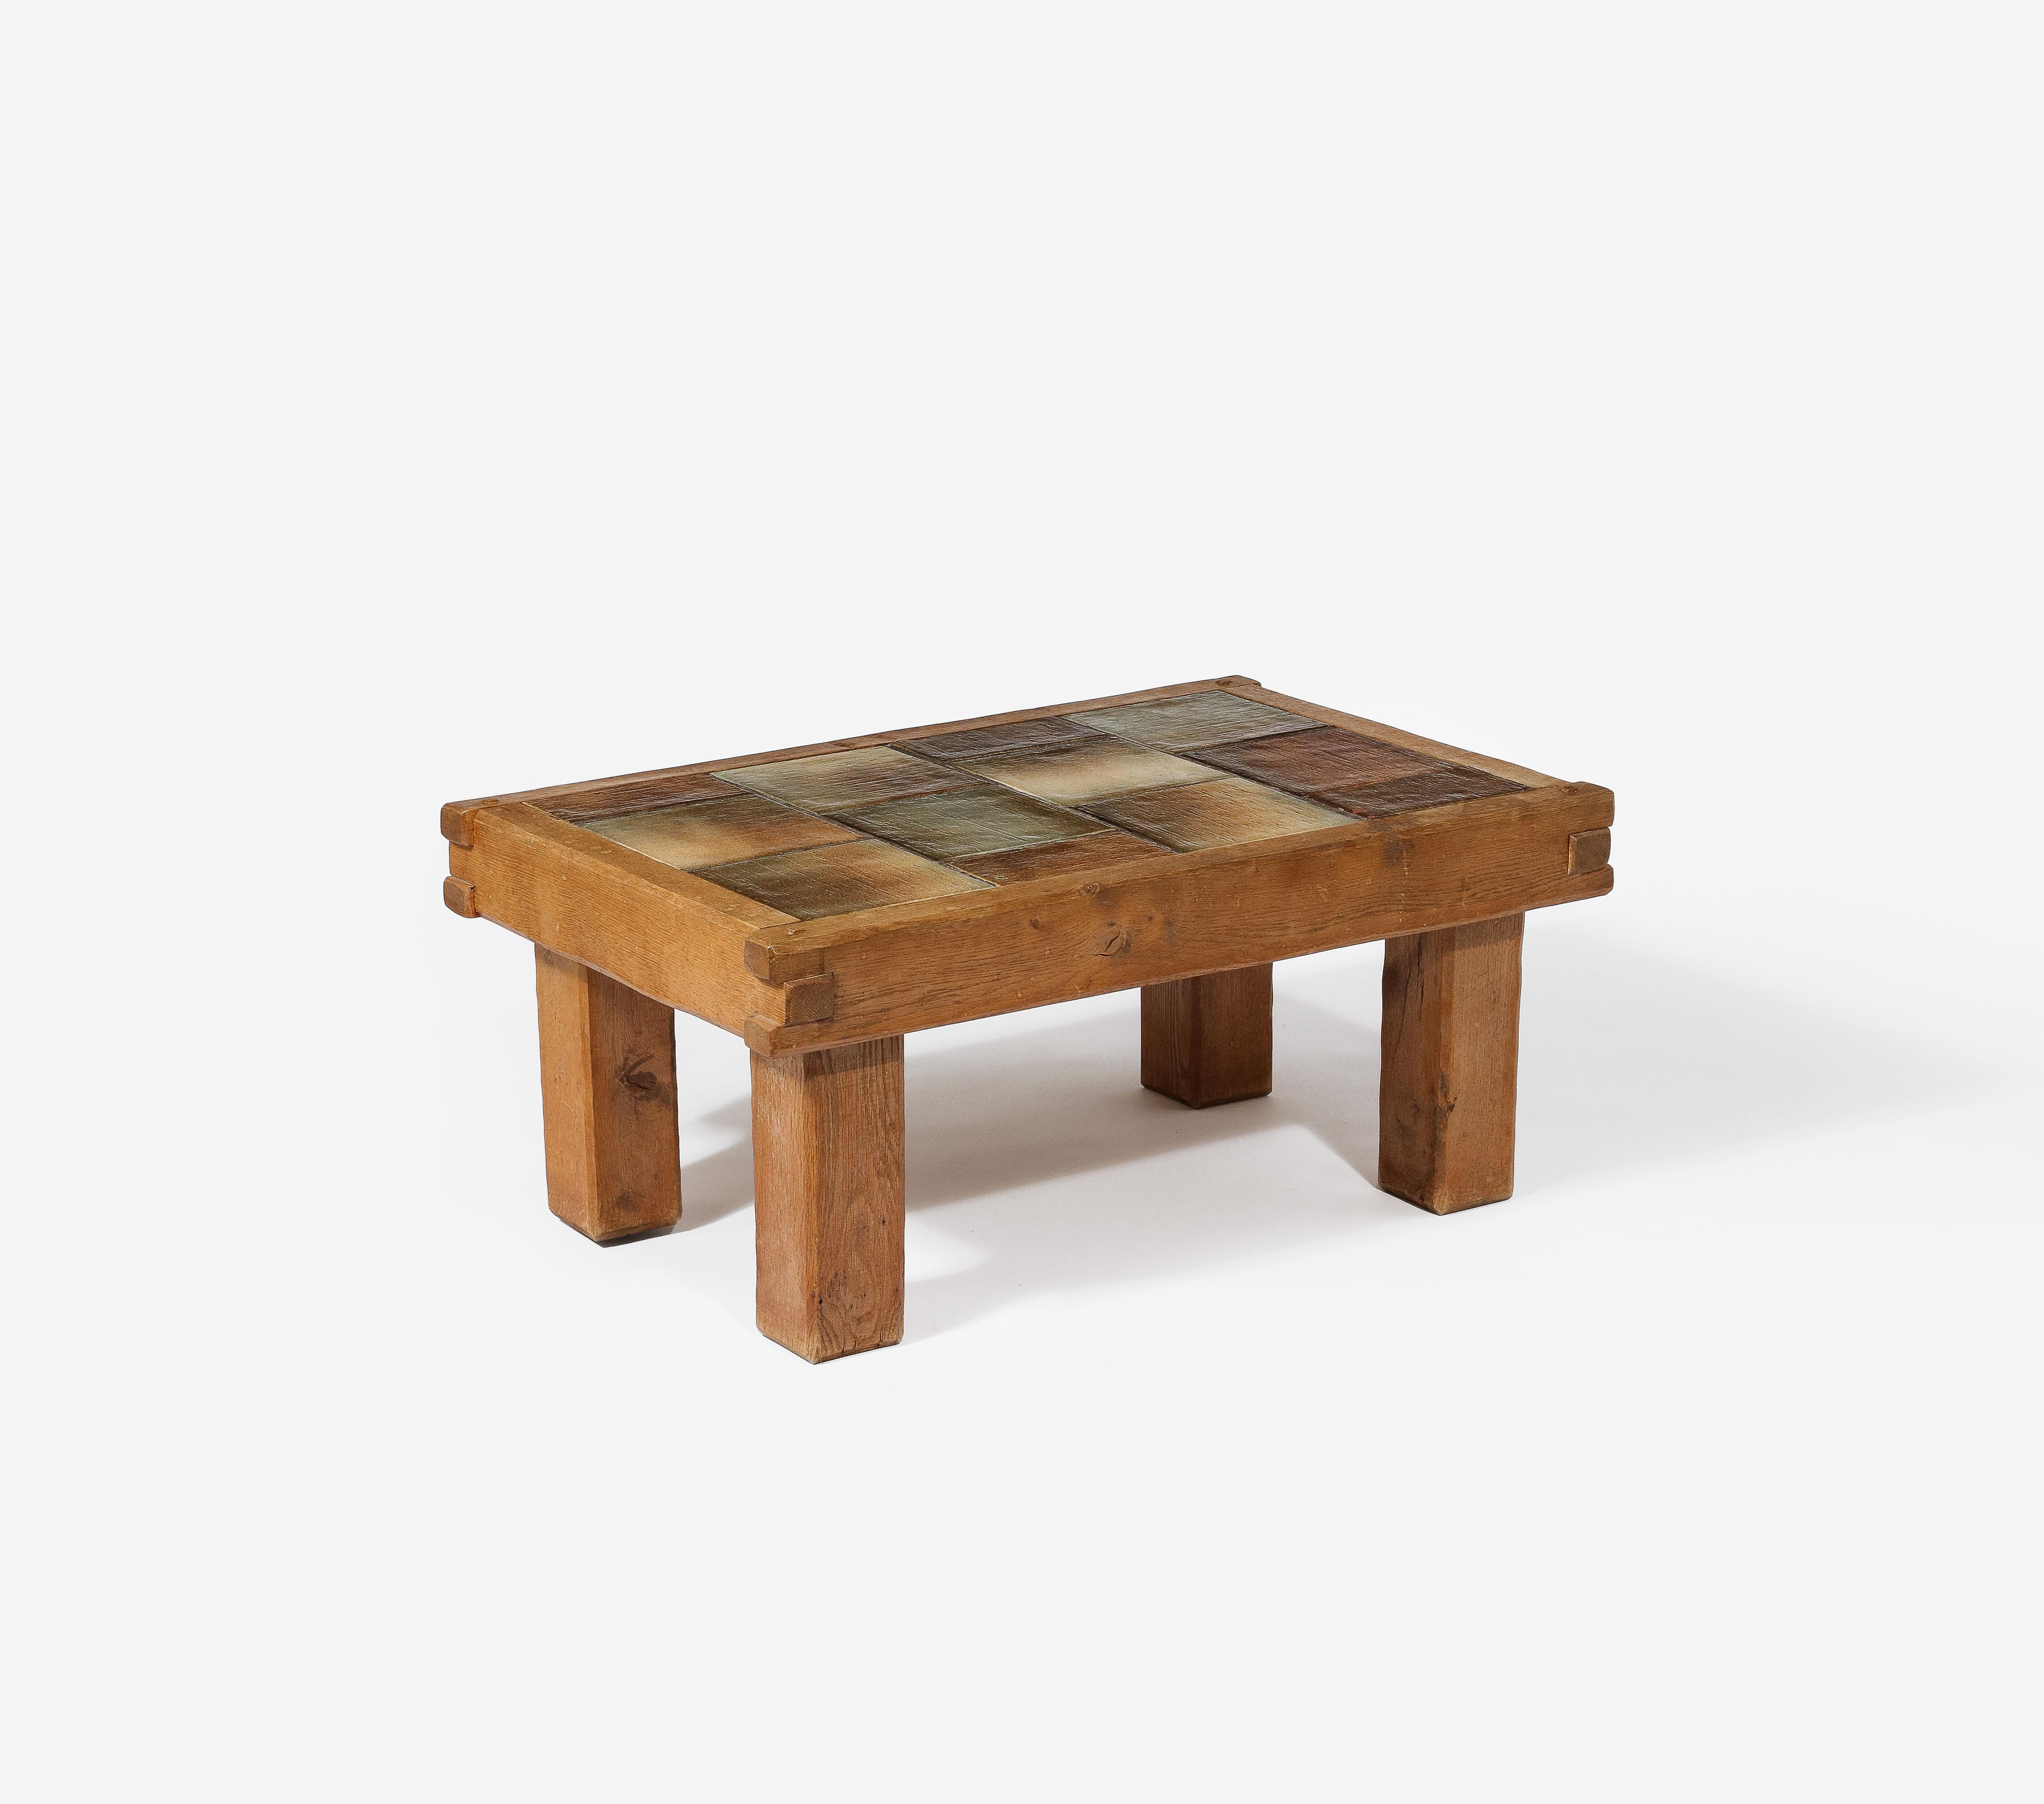 Small Brutalist Coffee Table with Ceramic Tile Top & Oak, France 1960's For Sale 9